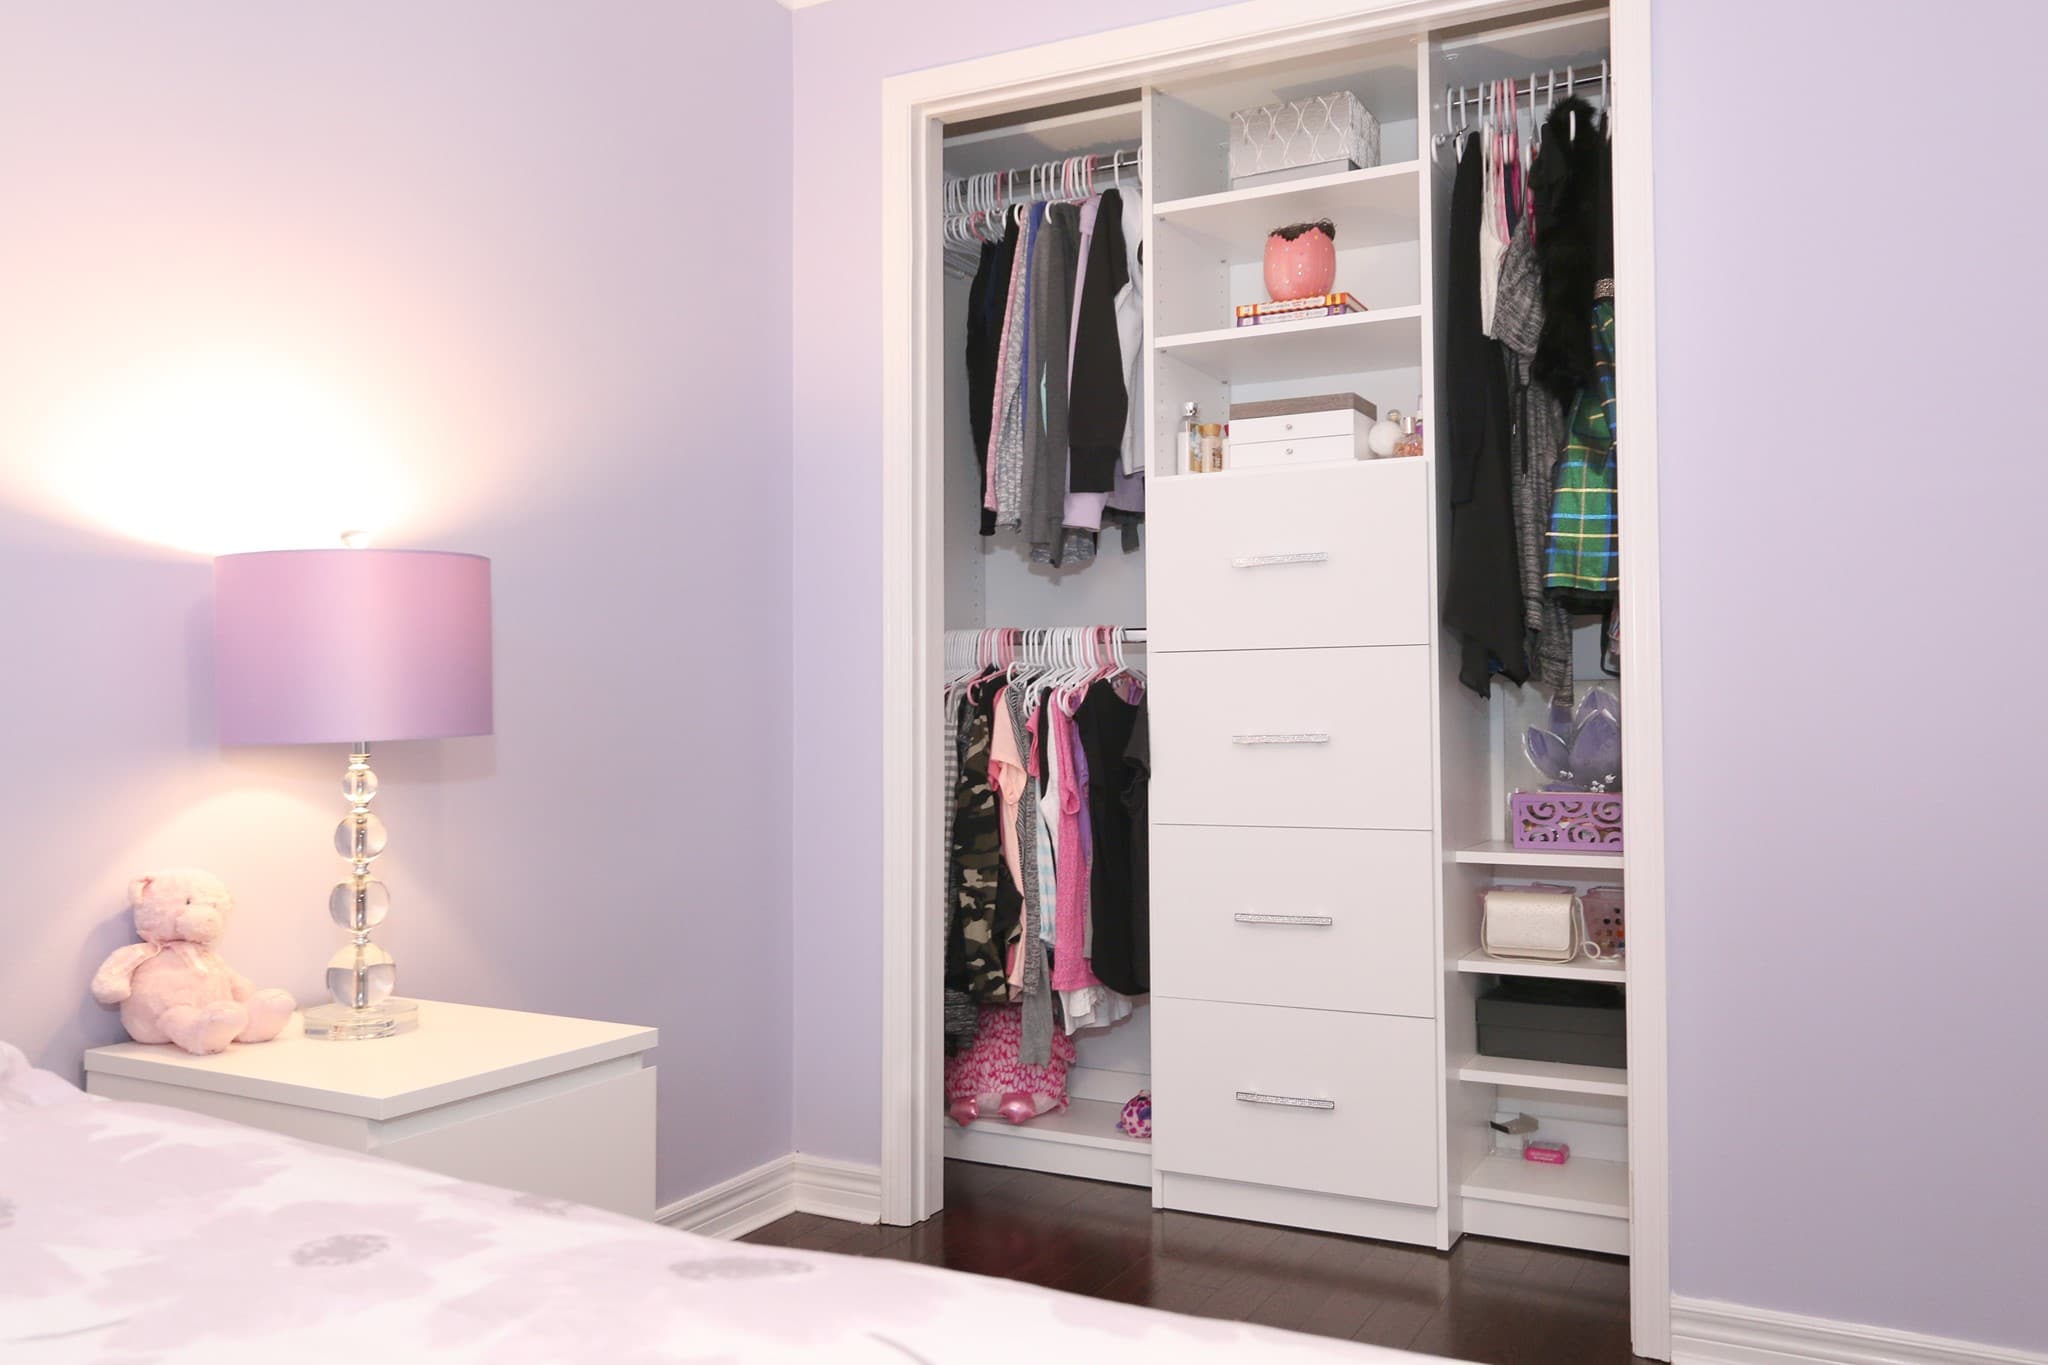 lavender 5 ways to organize your child's room + make it fabulous